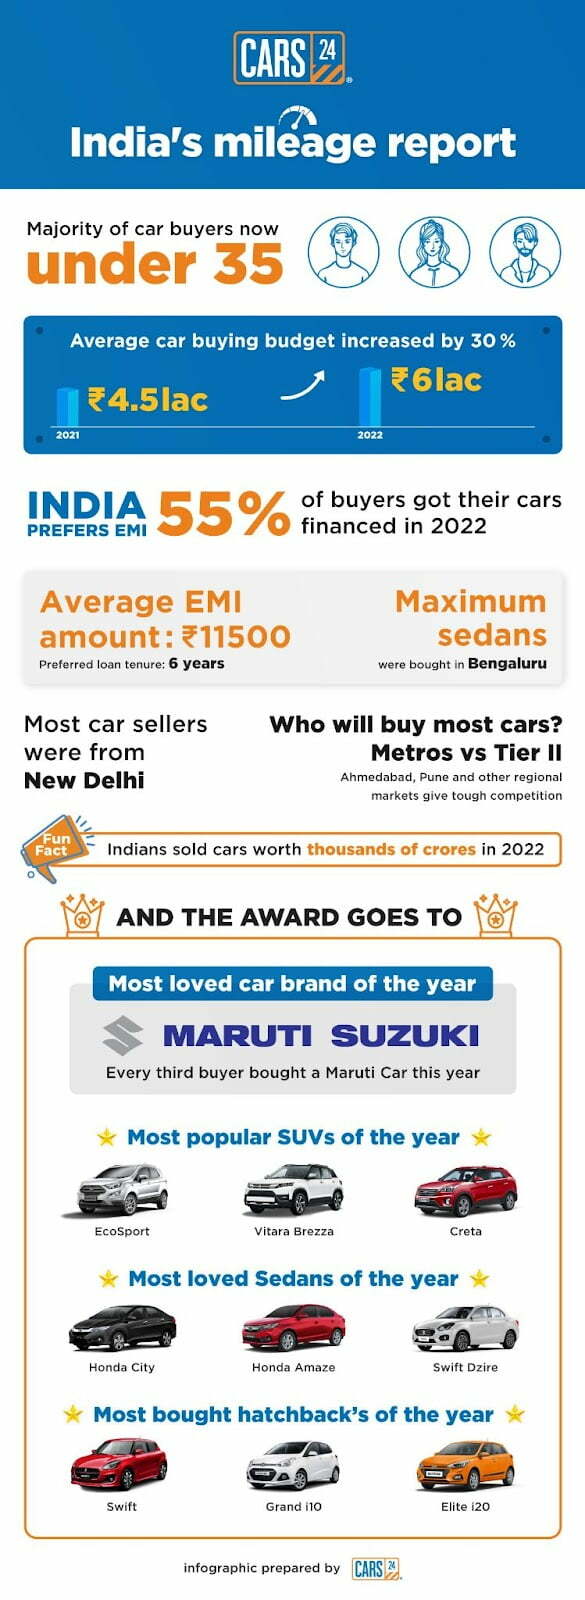 India’s Car Buying Budget Increases by 30% - Cars24 Leads As A Platform (1)